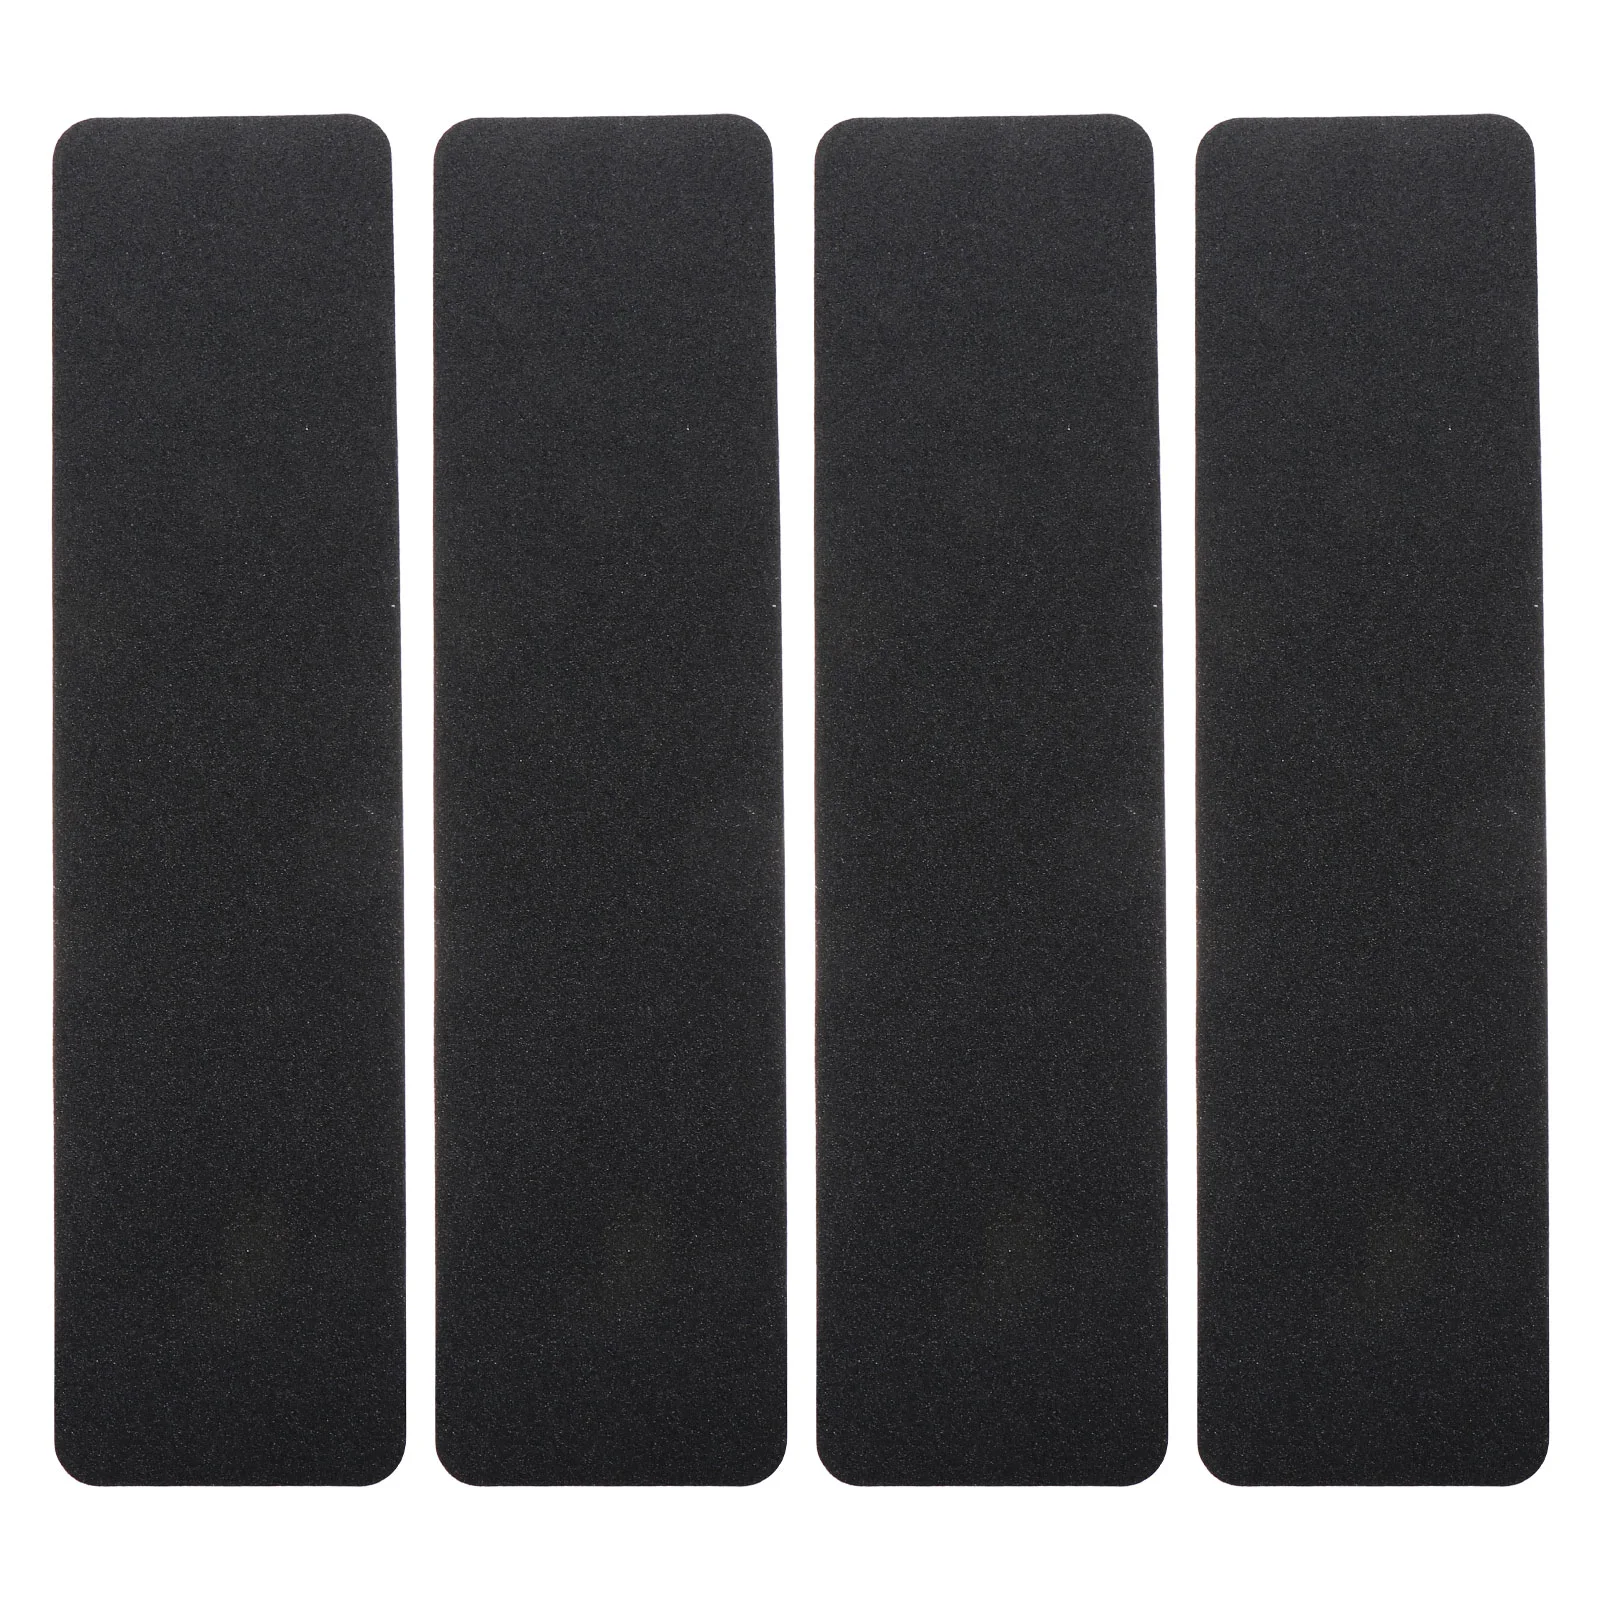 

4Pcs Anti Tape ( 2397 x 589inch ) Non Safety Grip Tape Strong Traction Friction Abrasive Adhesive for Stairs Steps Outdoor